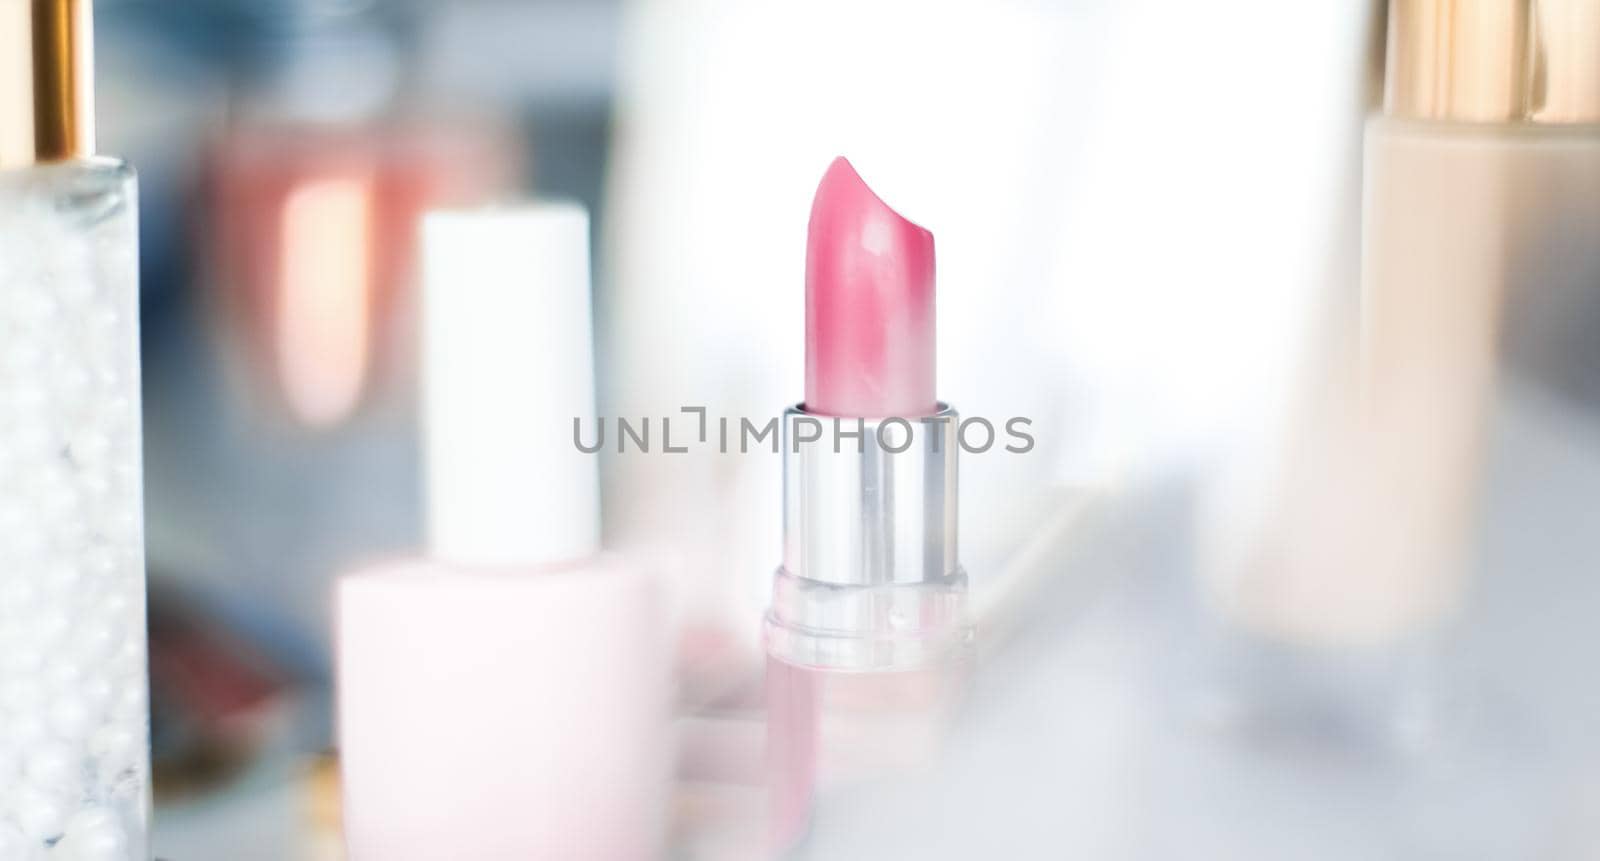 Cosmetic branding, girly and glamour concept - Cosmetics, makeup products on dressing vanity table, lipstick, foundation base, nailpolish and eyeshadows for luxury beauty and fashion brand ads design